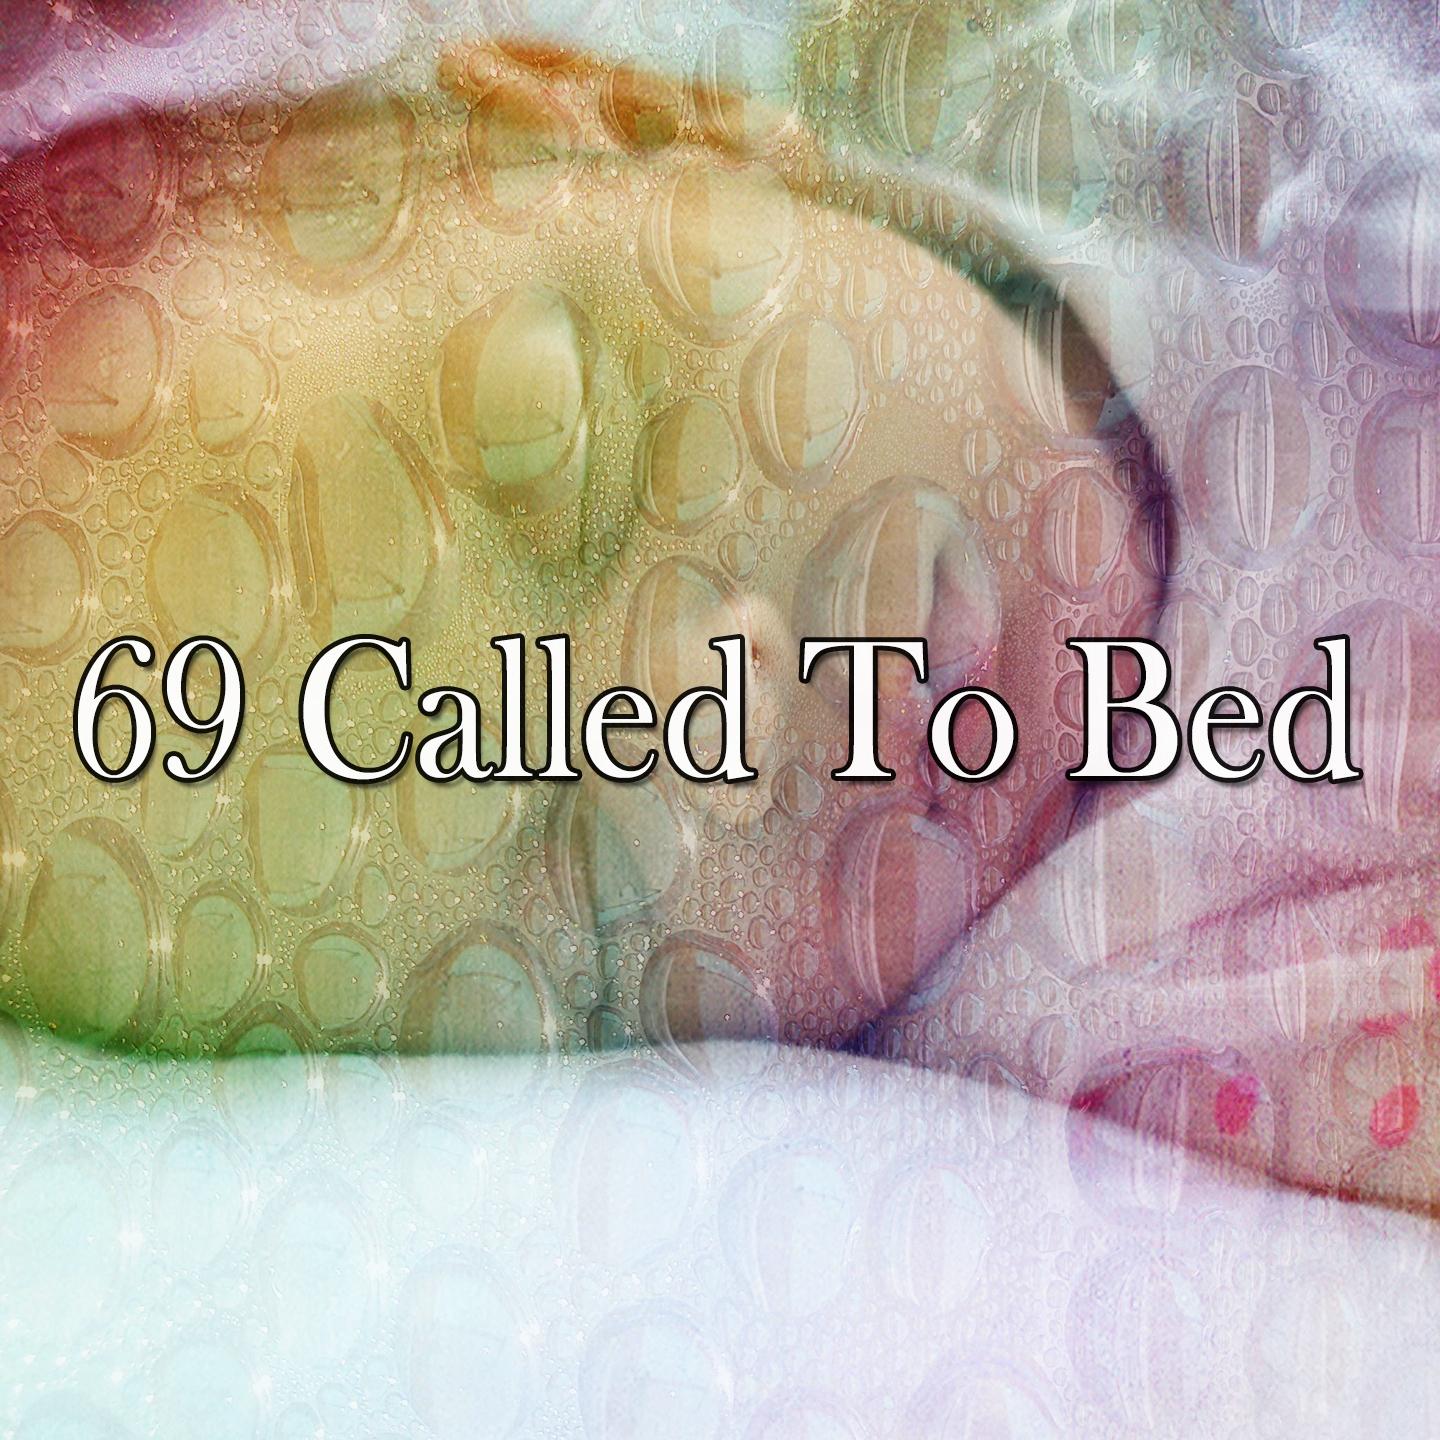 69 Called to Bed